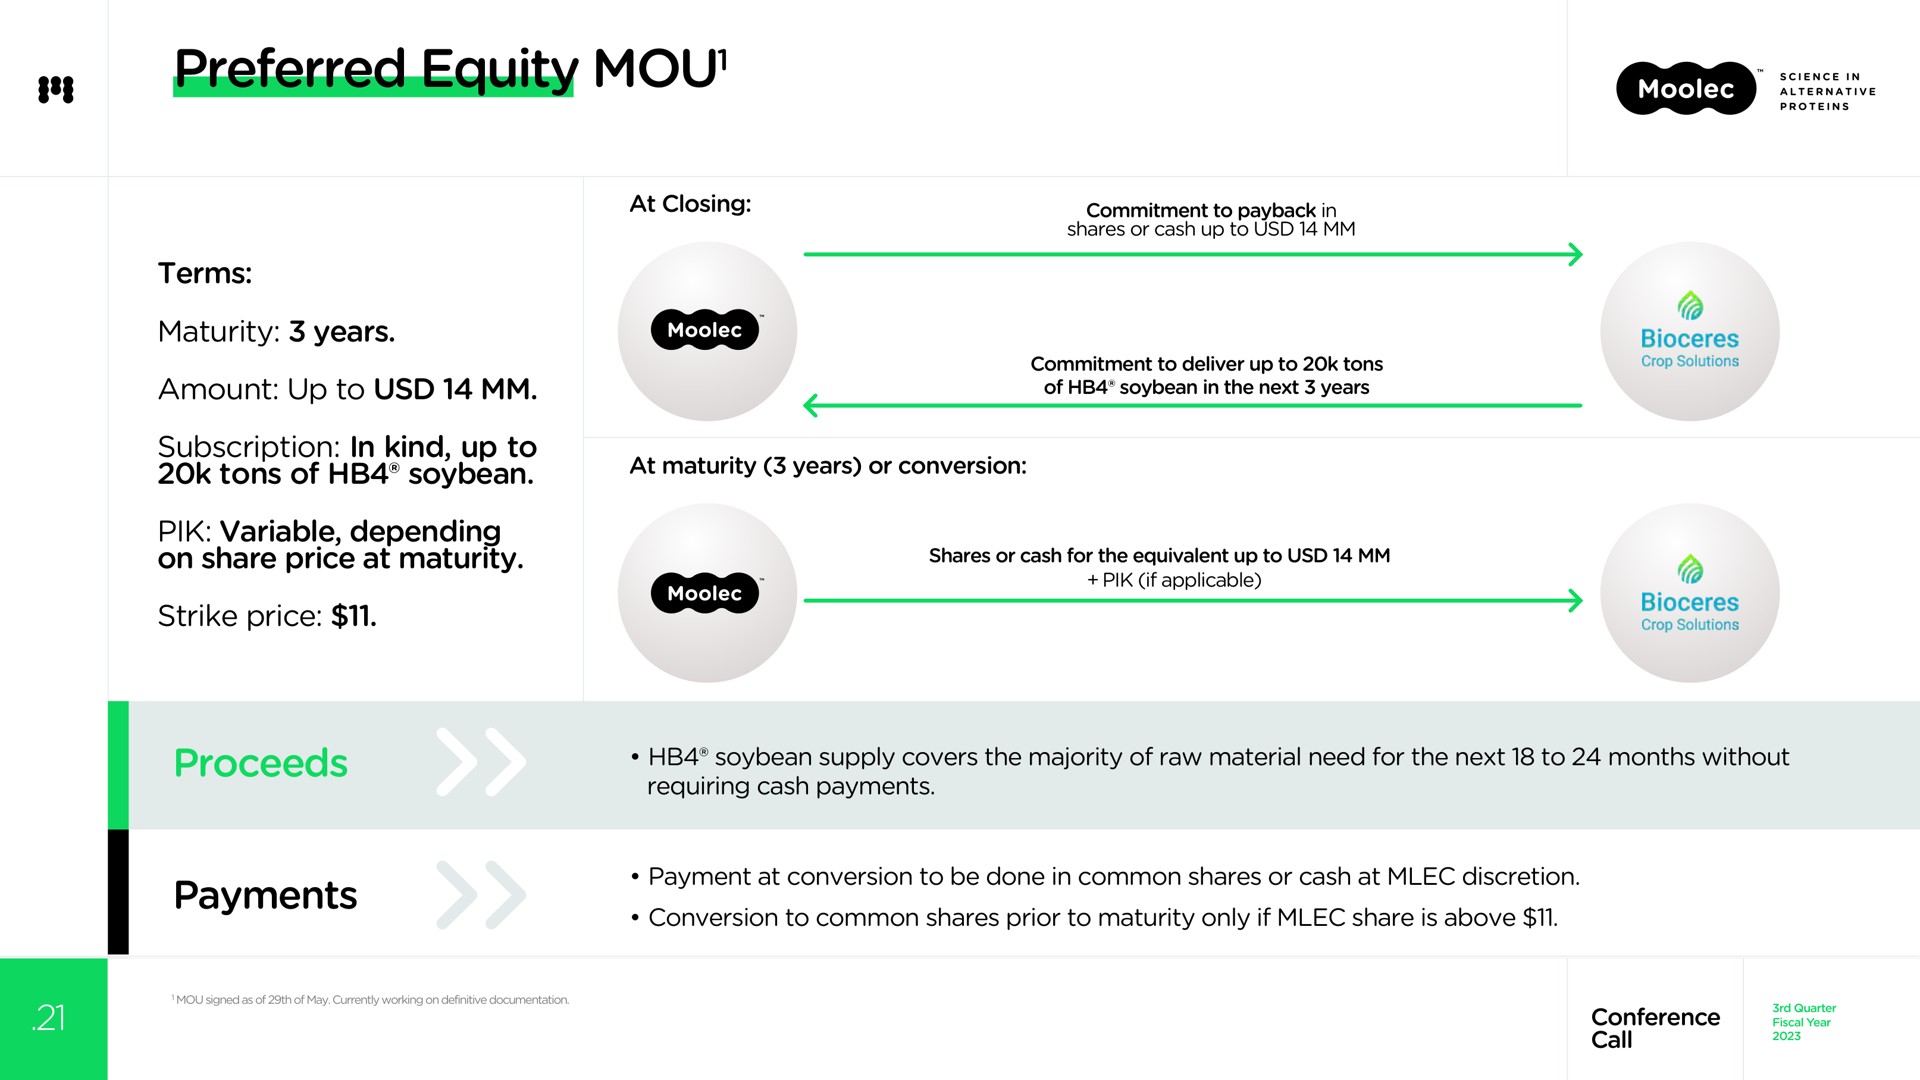 preferred equity mou terms maturity years amount up to subscription in tons of pik variable on share price at maturity depending kind up to soybean strike price proceeds payments mou | Moolec Science